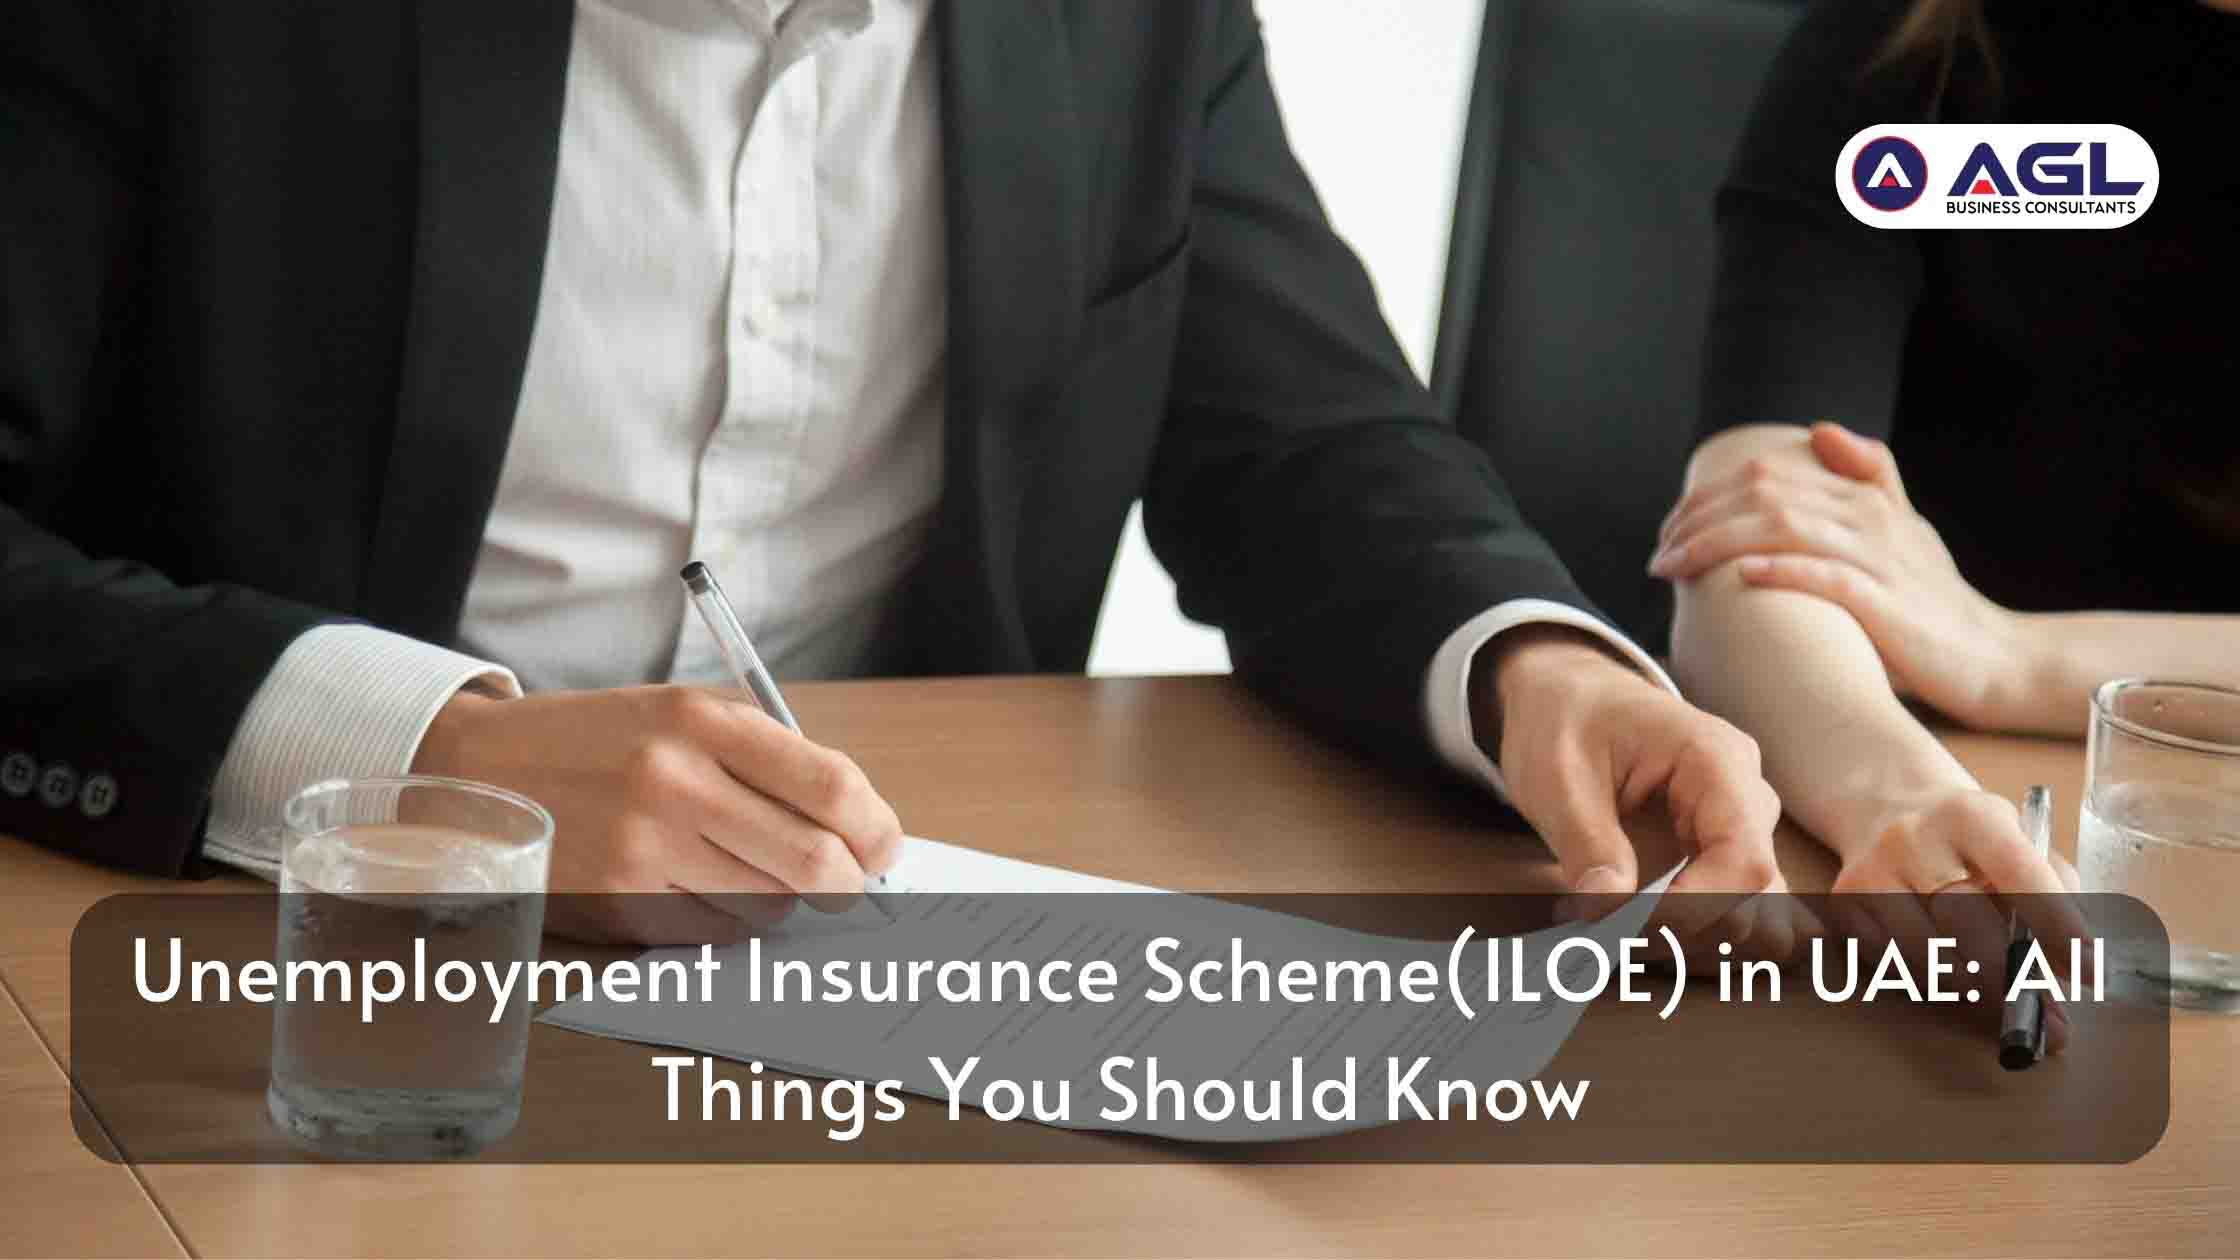 Unemployment Insurance Scheme in UAE: All Things You Should Know